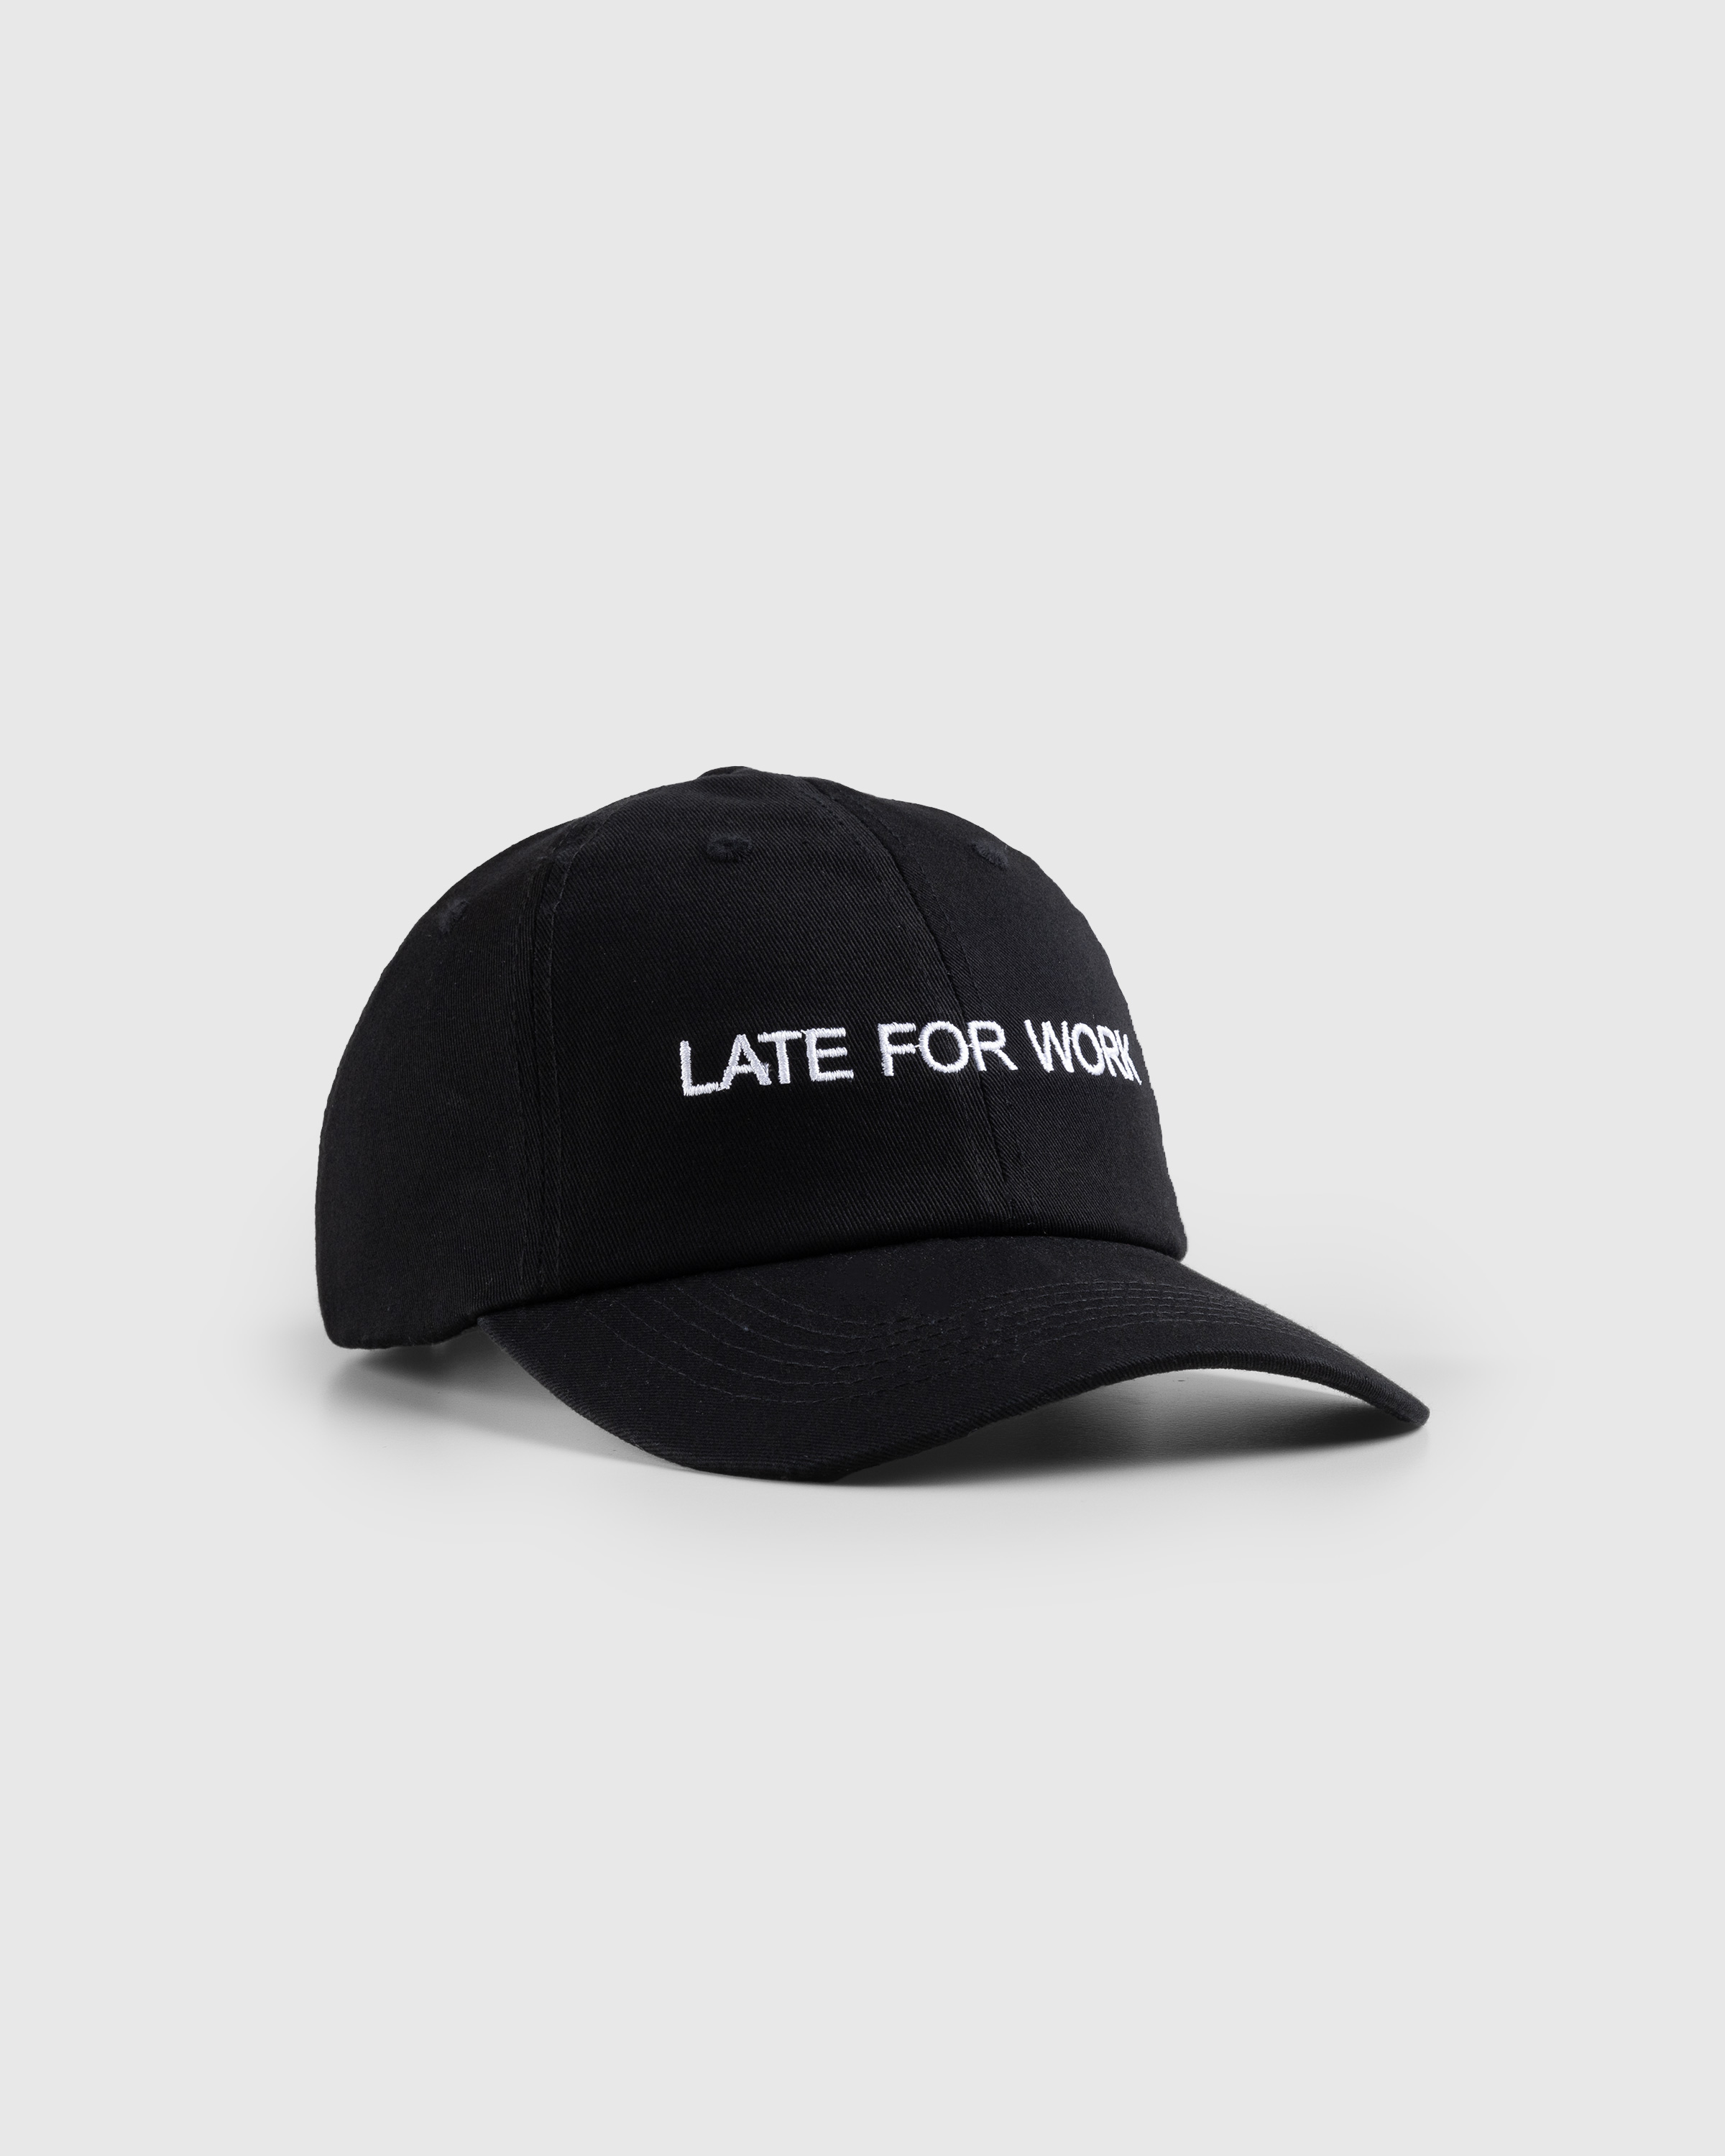 HO HO COCO – Late For Work Hat Black/White - Caps - Black - Image 1